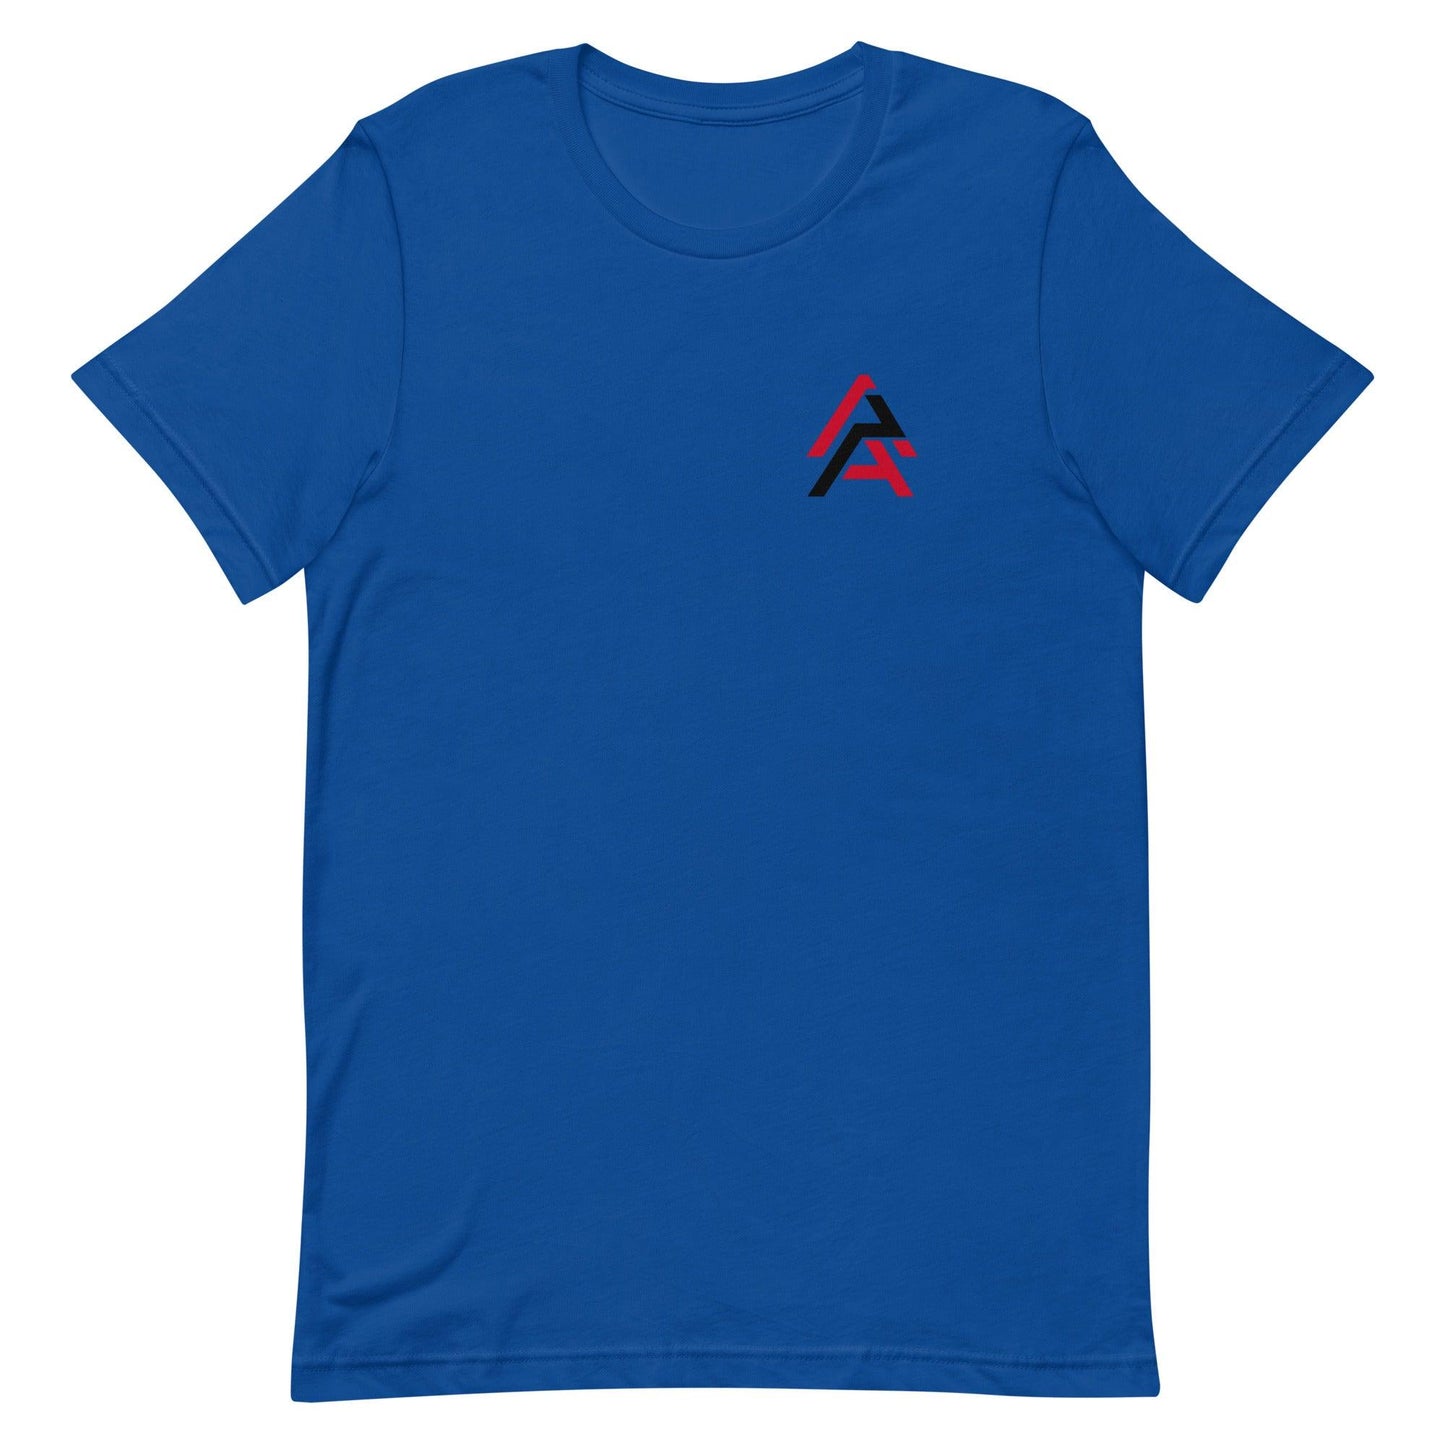 Anthony Alford “AA” t-shirt - Fan Arch